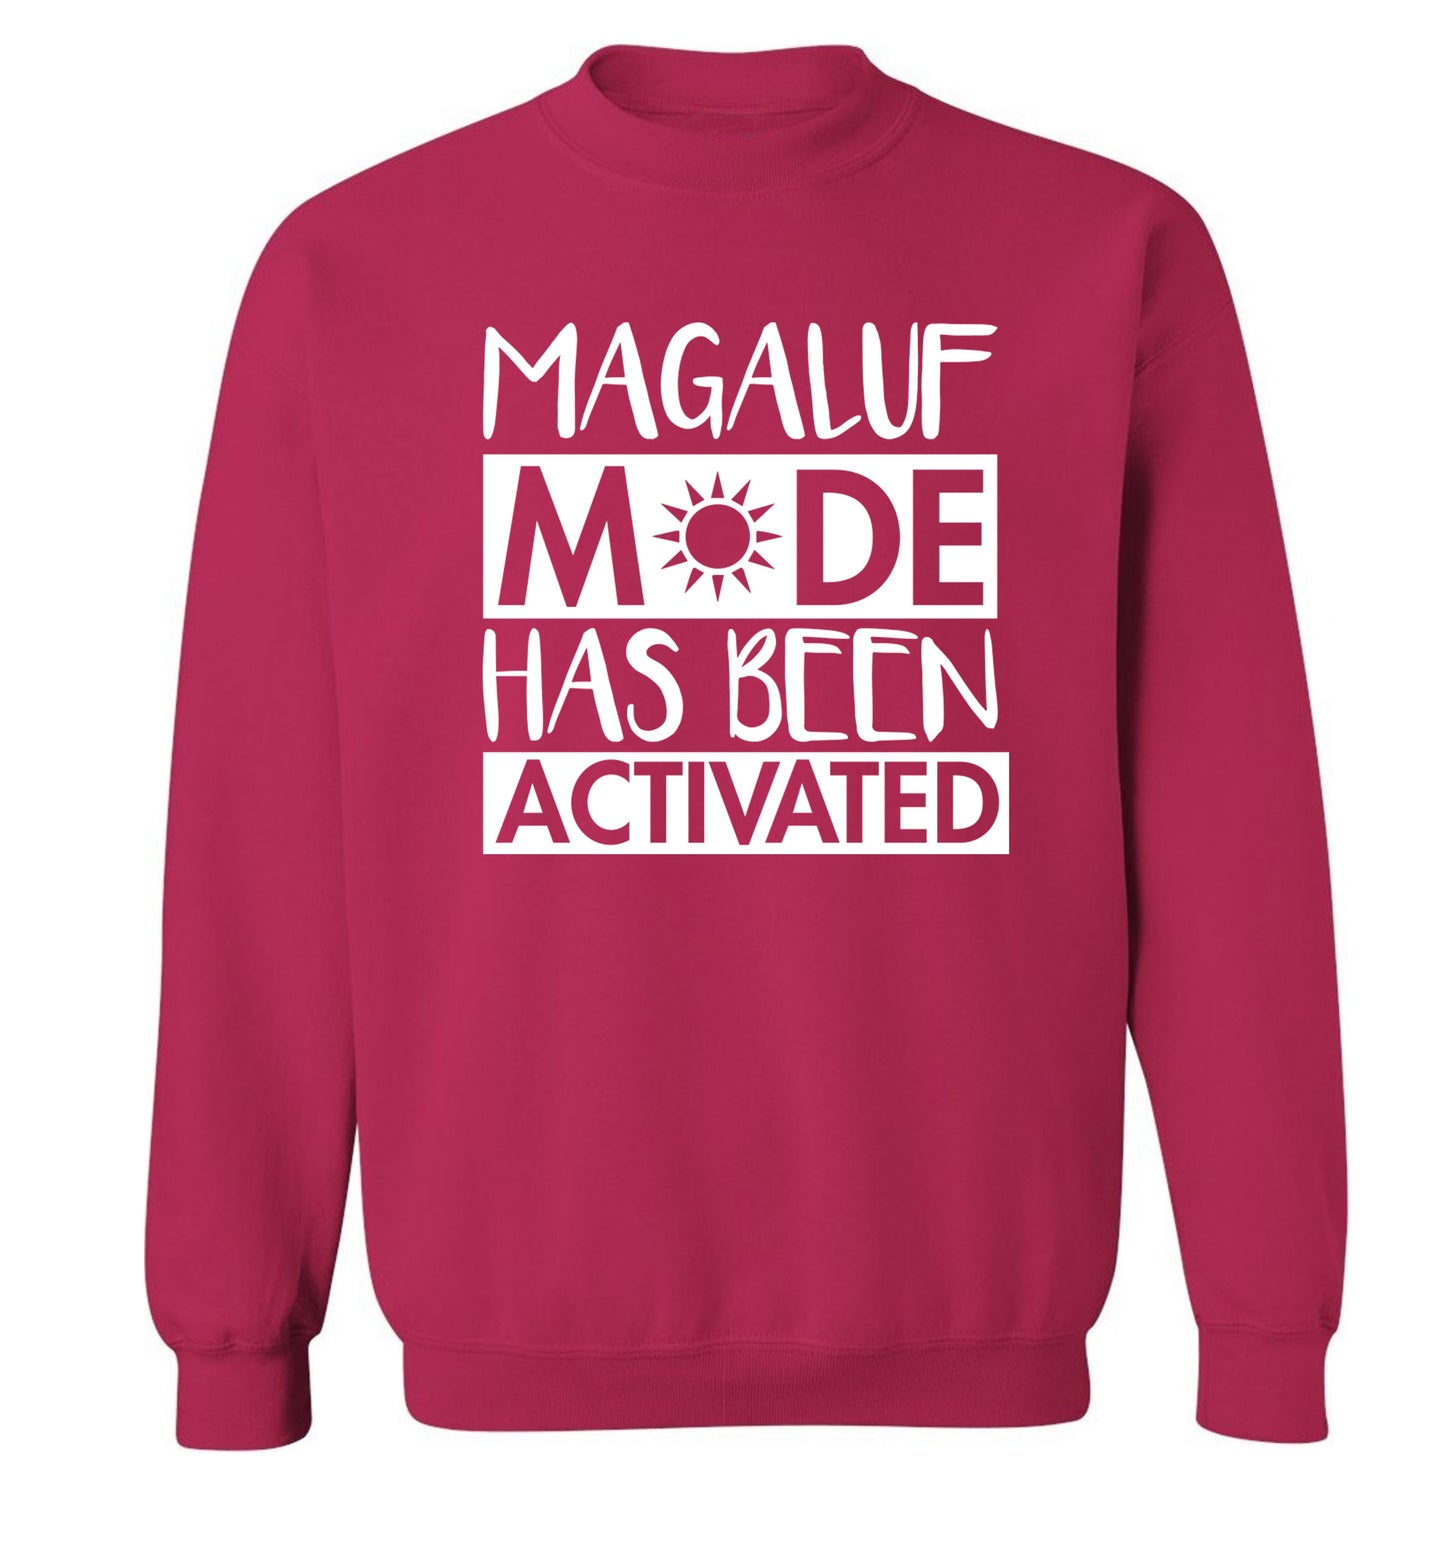 Magaluf mode has been activated Adult's unisex pink Sweater 2XL